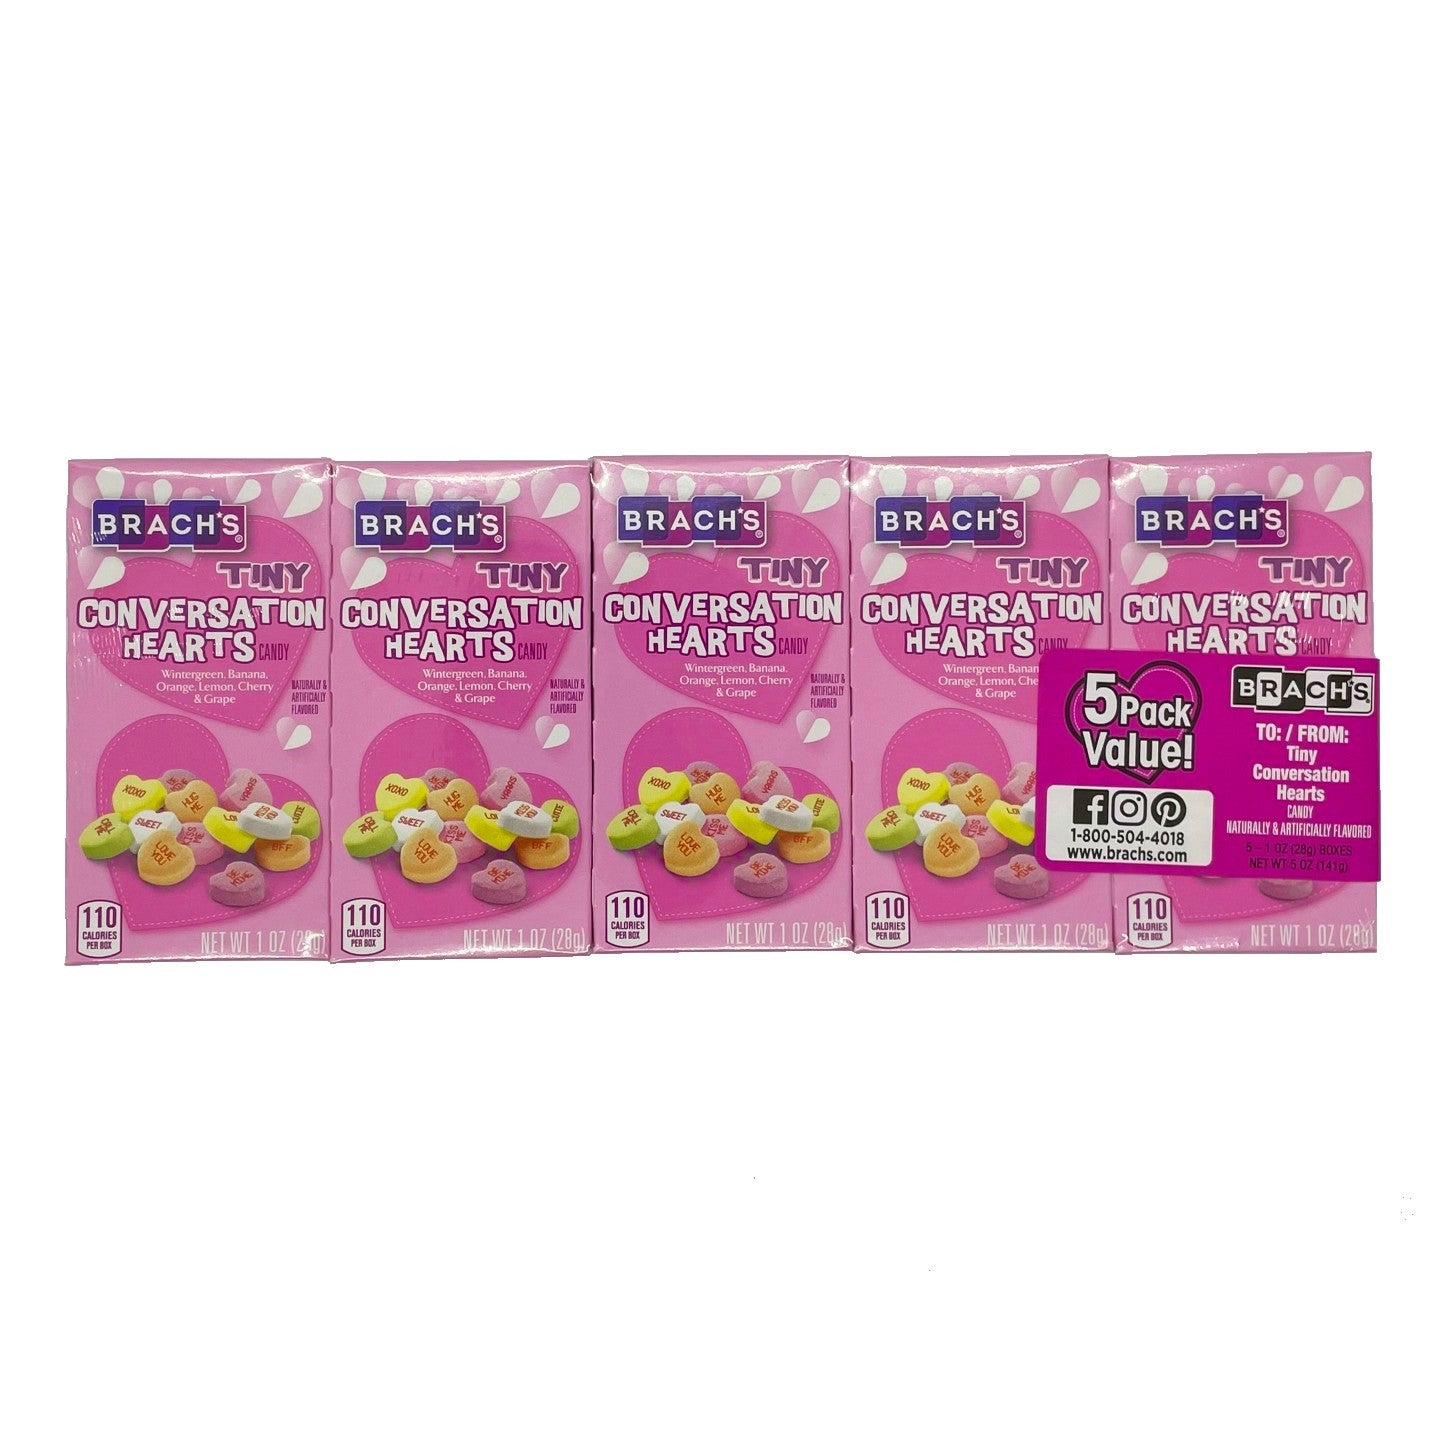 BRACHS Tiny Conversation Hearts Candy 0.75 oz, Packaged Candy